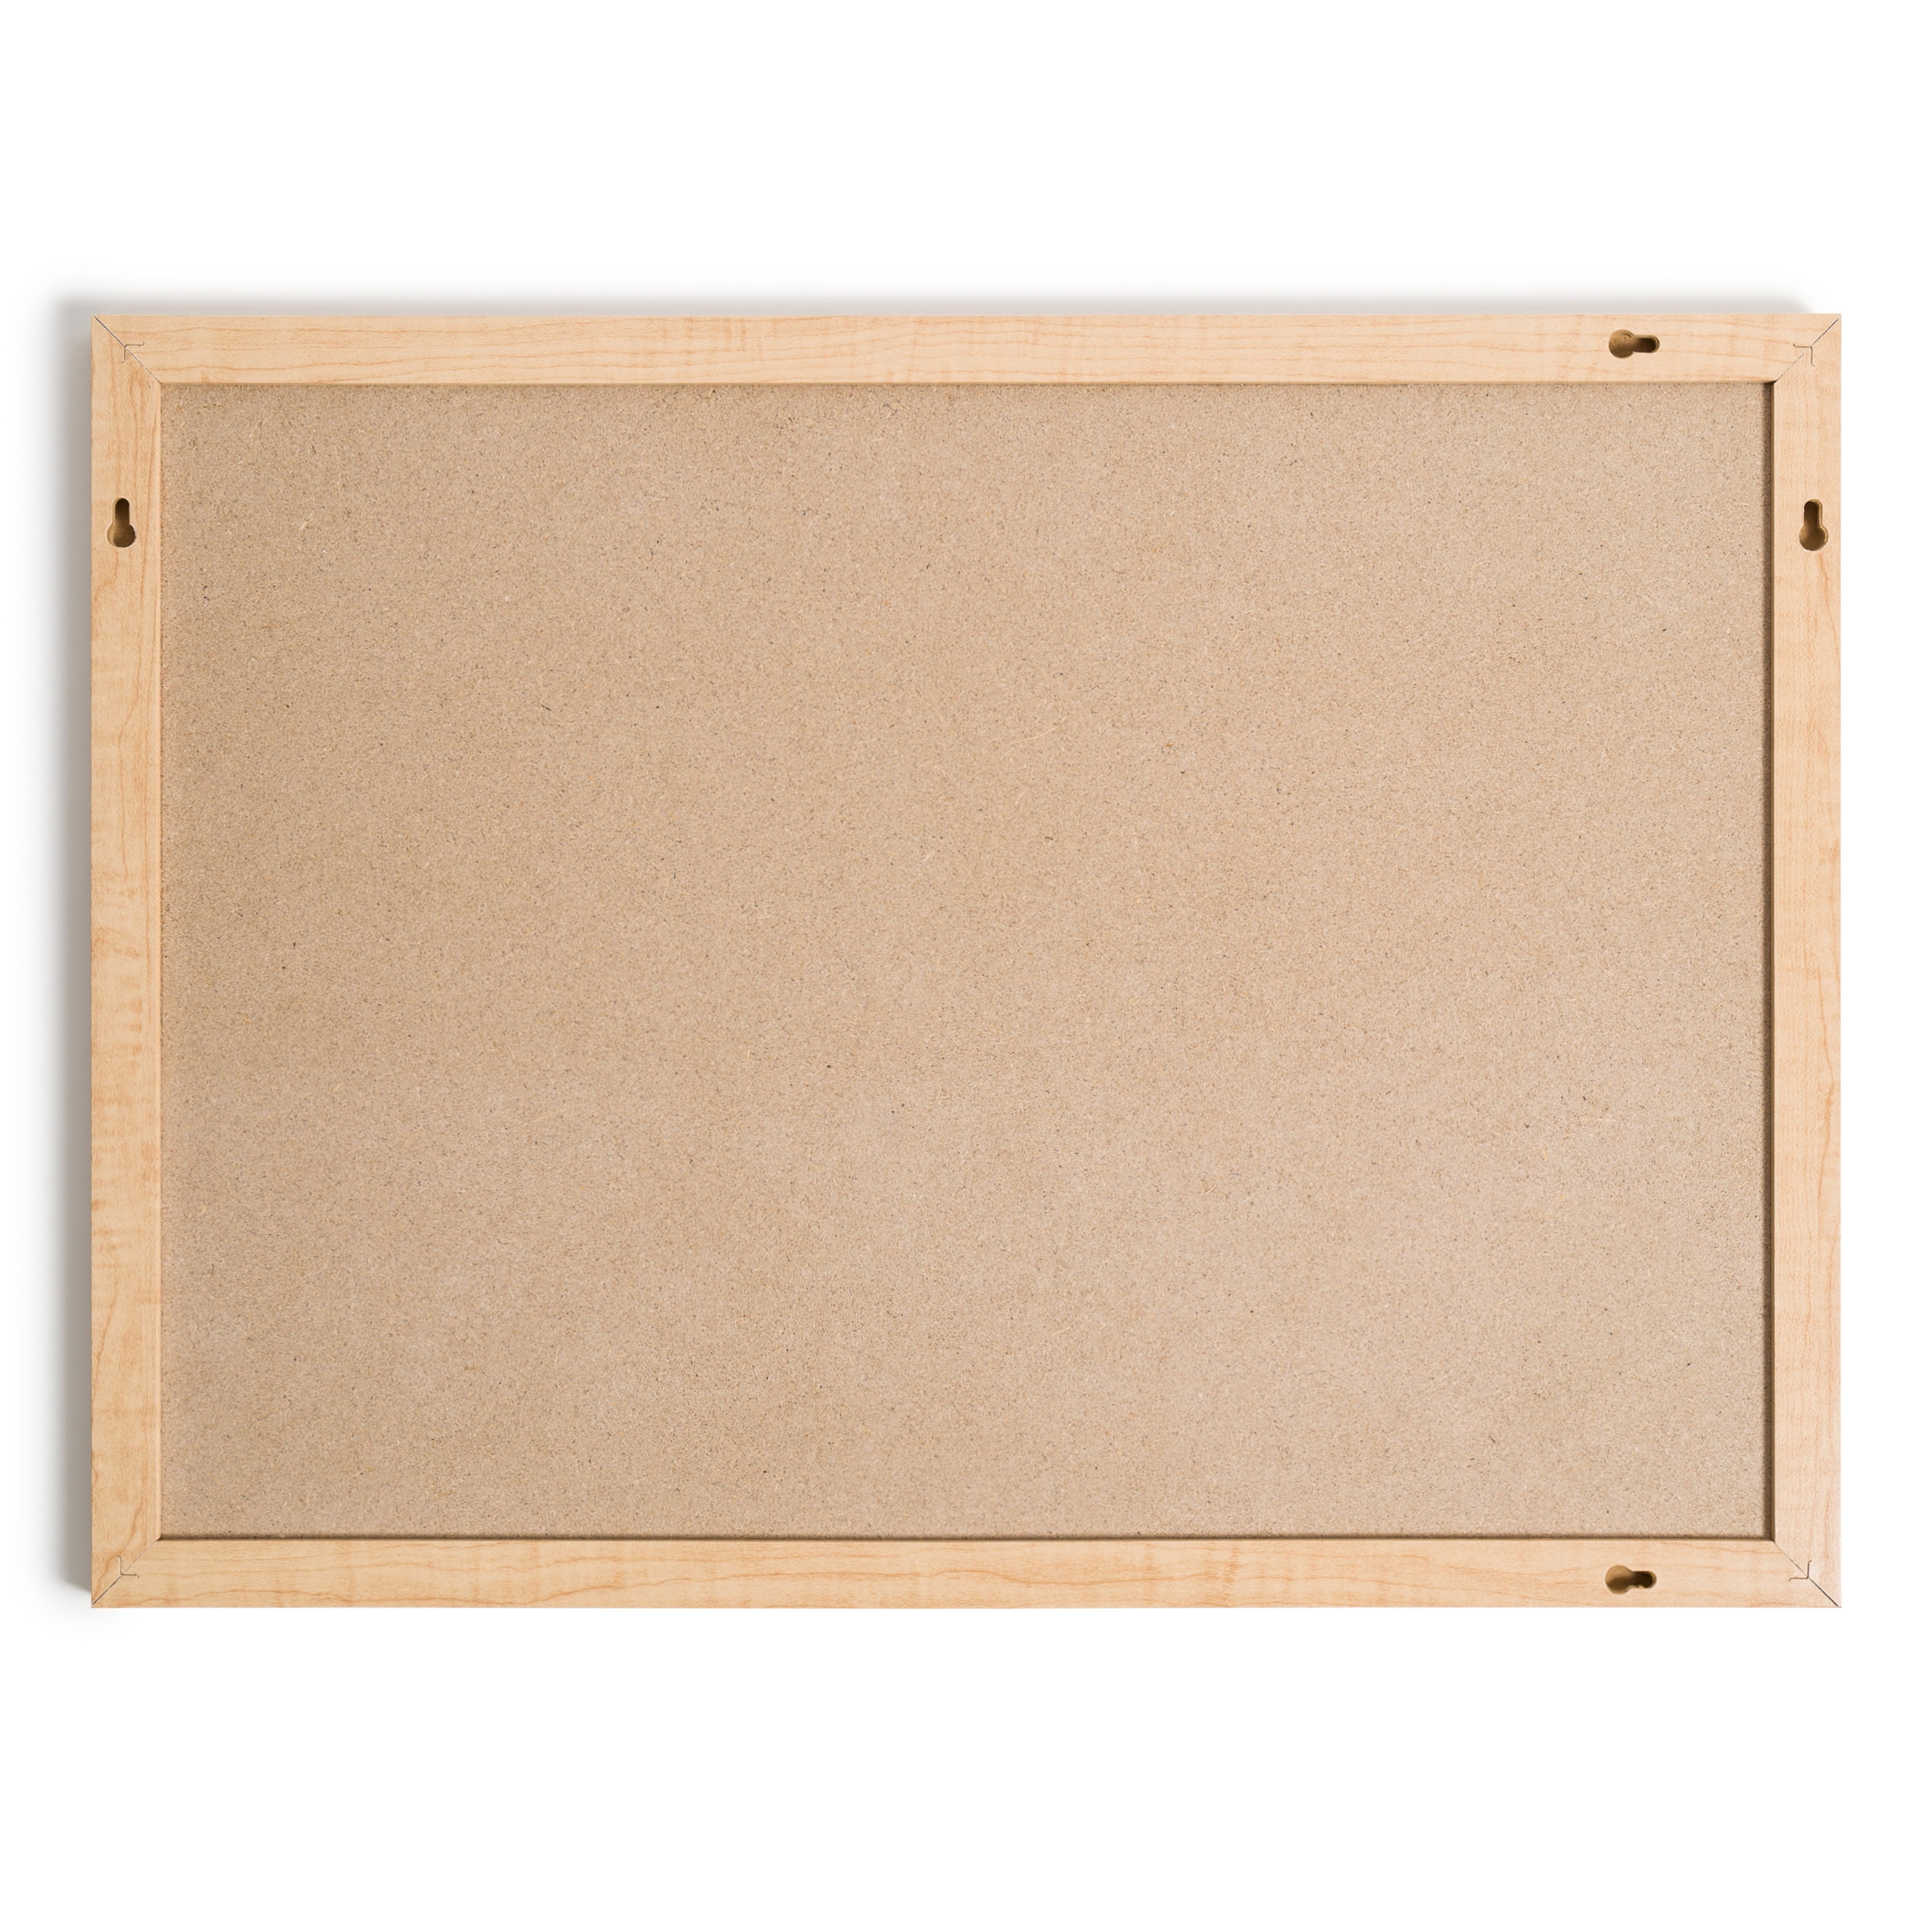 Cork Board with Wood Frame - 3'x2' - general for sale - by owner -  craigslist